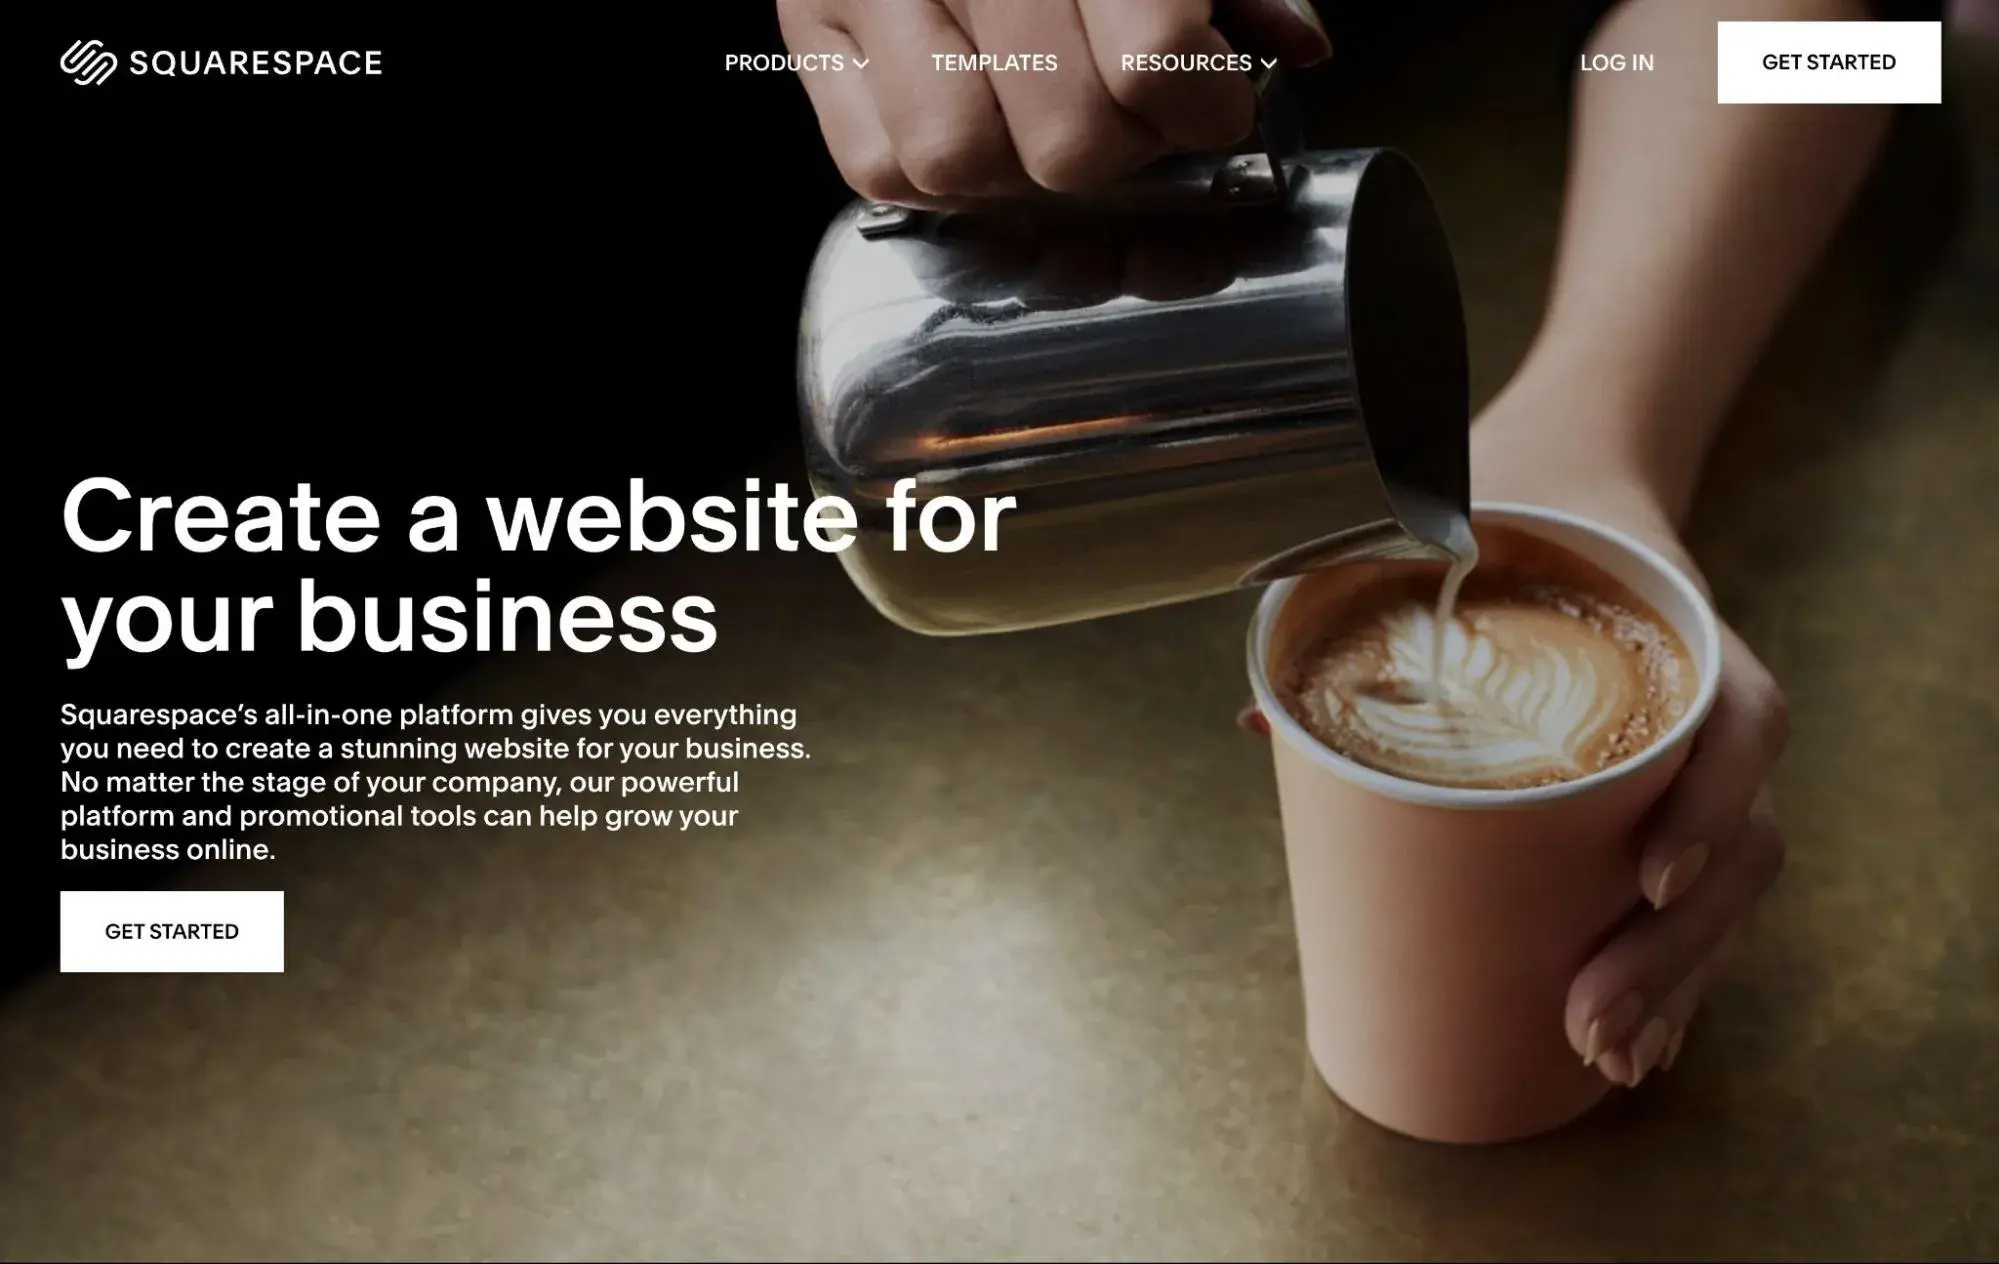 The Squarespace page for small businesses